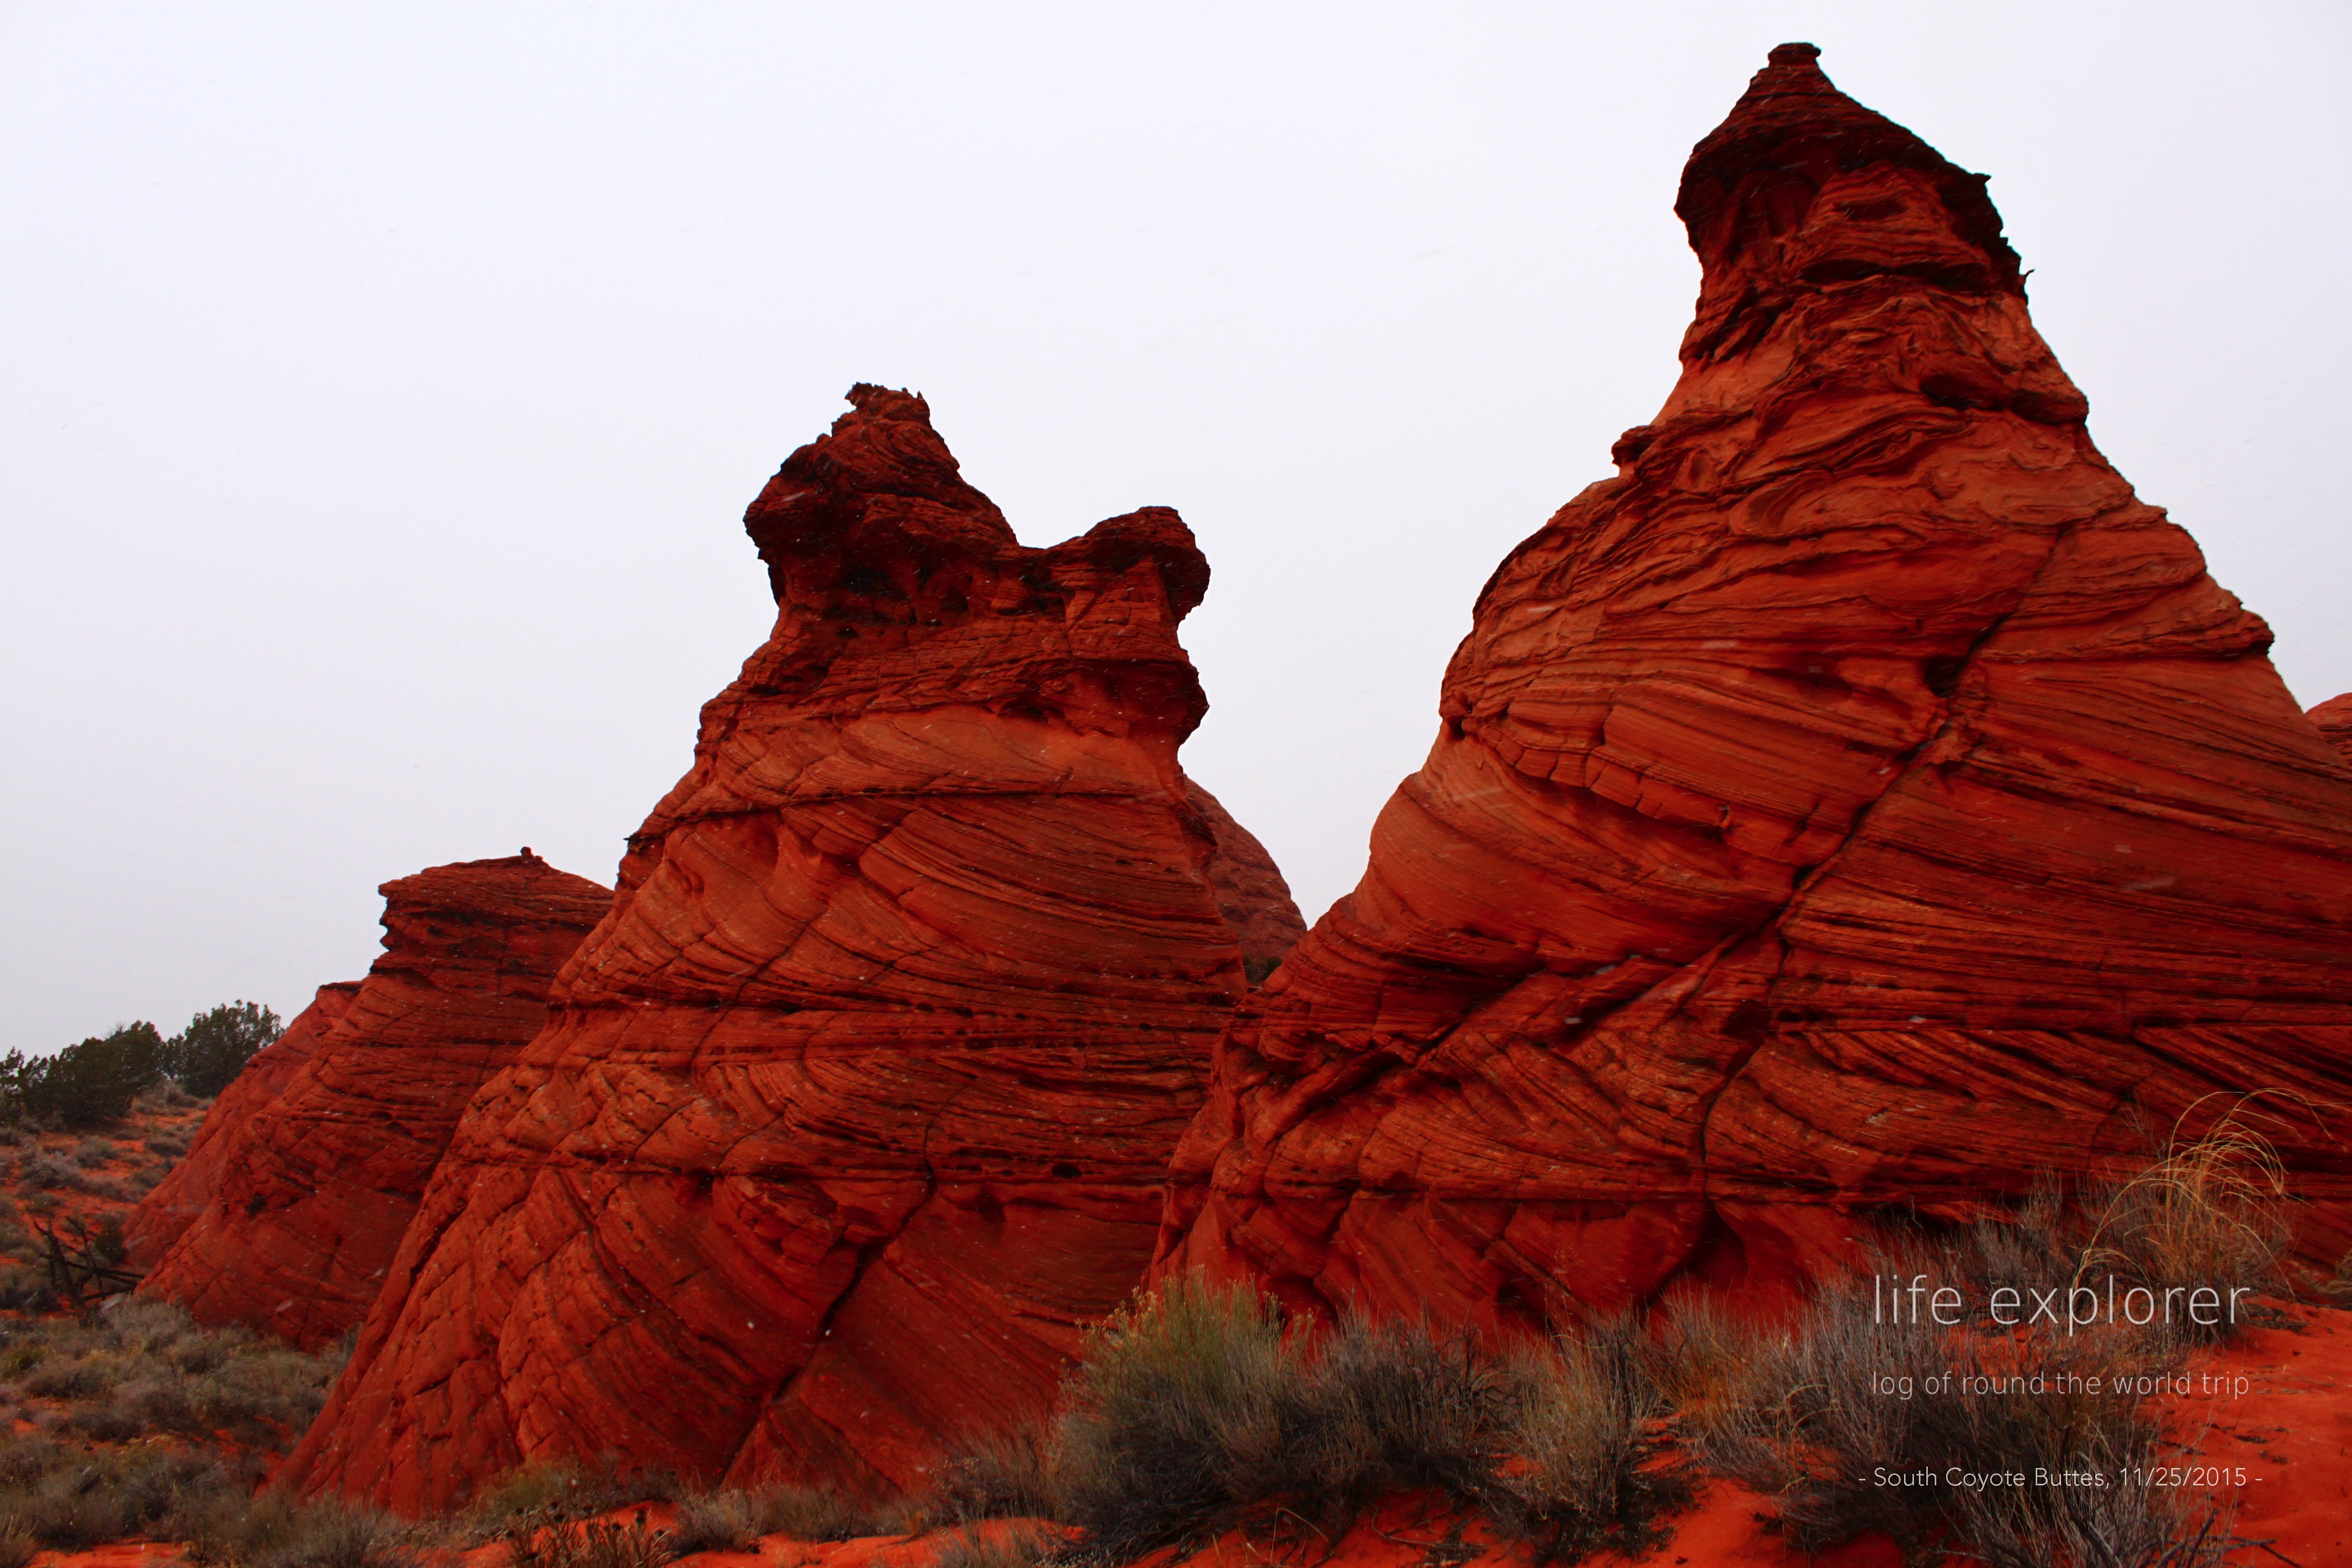 [Photo] 151125 US – Coyote Buttes